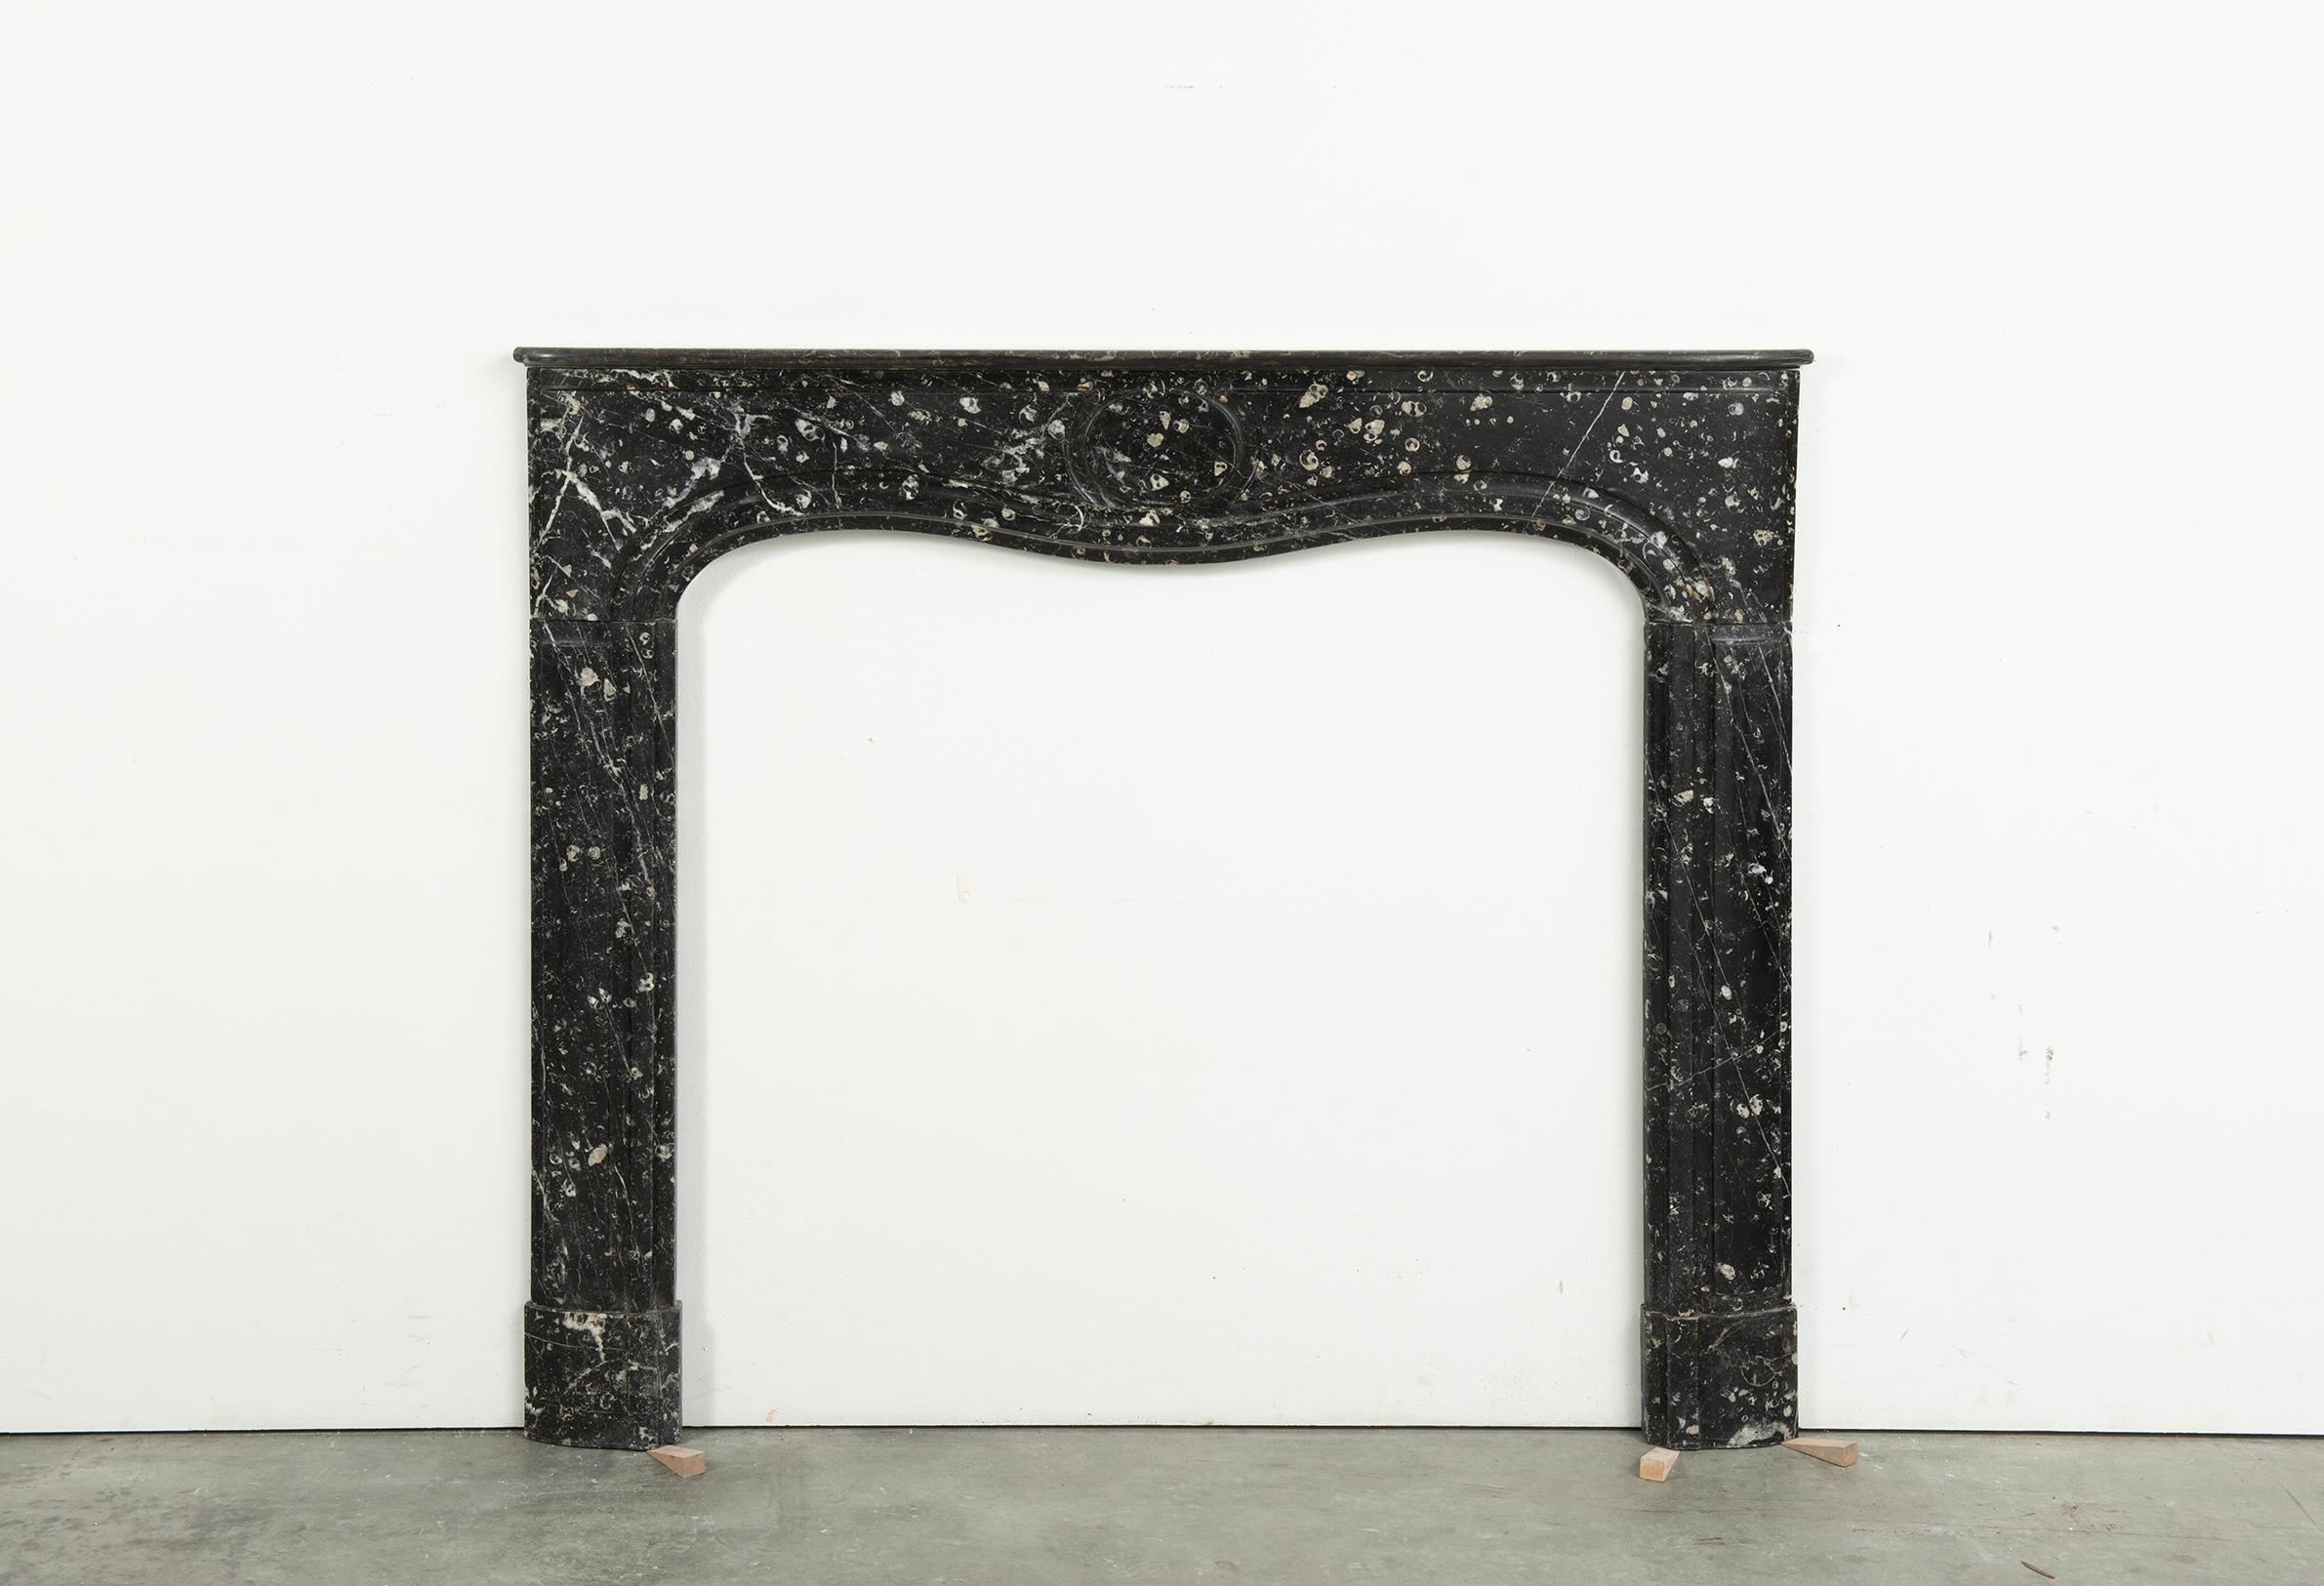 So excited to have this very interesting and serene black and white marble mantel for sale.
This 18th century beauty shows a delicate and shallow profiled and curved shelf that rests on a paneled frieze centered with a simpel yet stylish